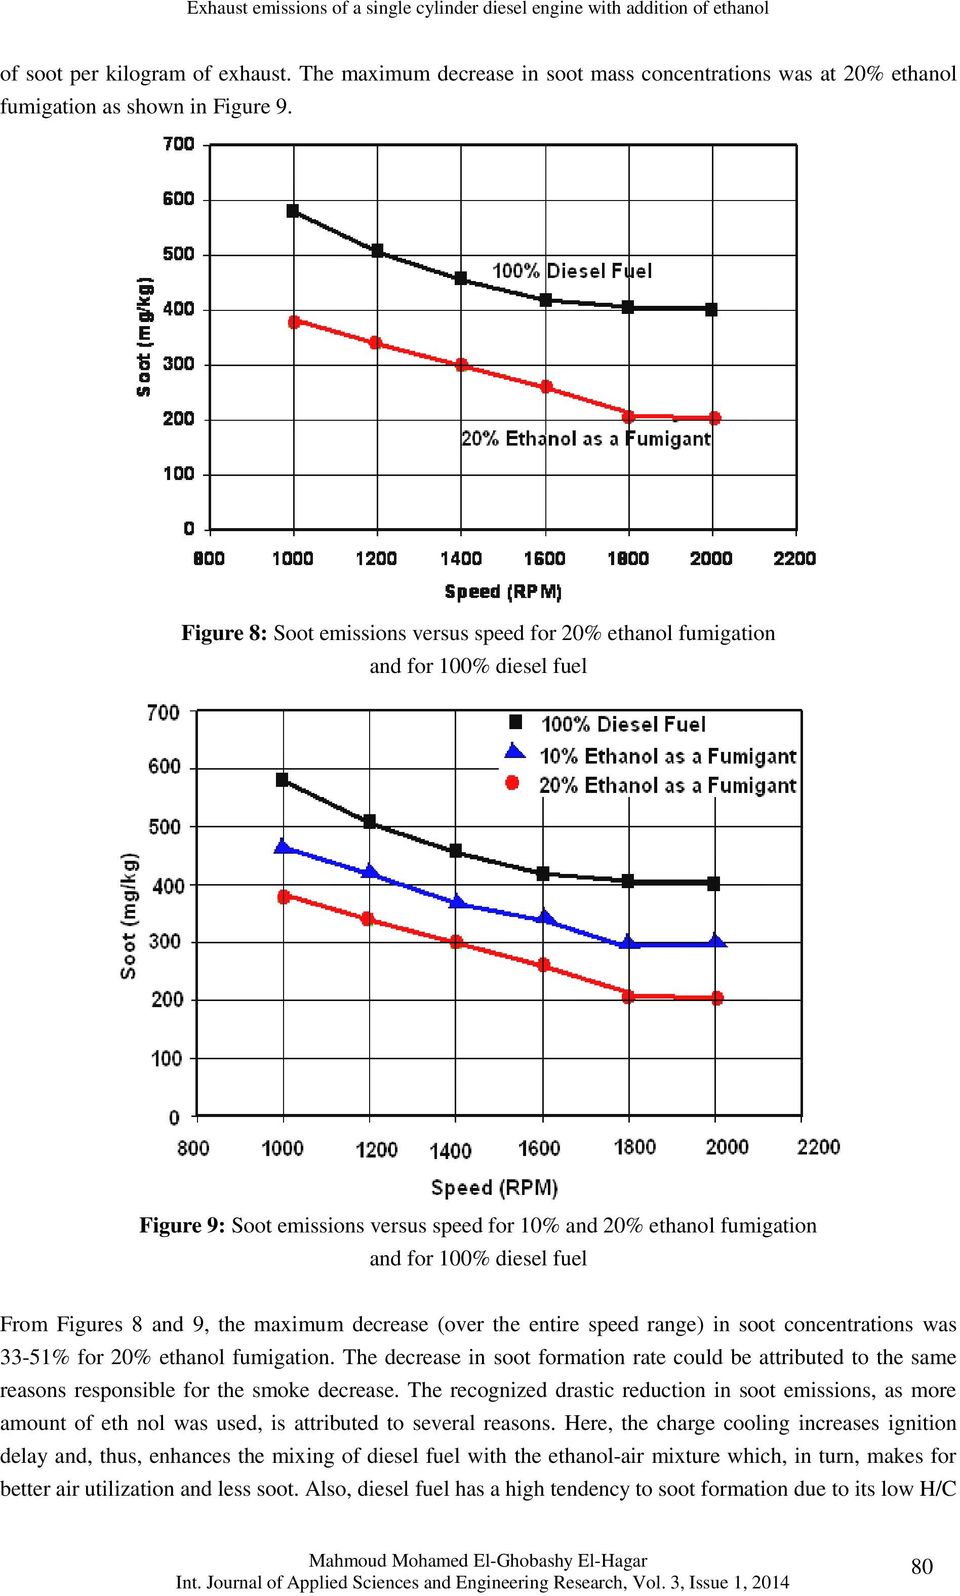 speed range) in soot concentrations was 33-51% for 20% ethanol fumigation. The decrease in soot formation rate could be attributed to the same reasons responsible for the smoke decrease.